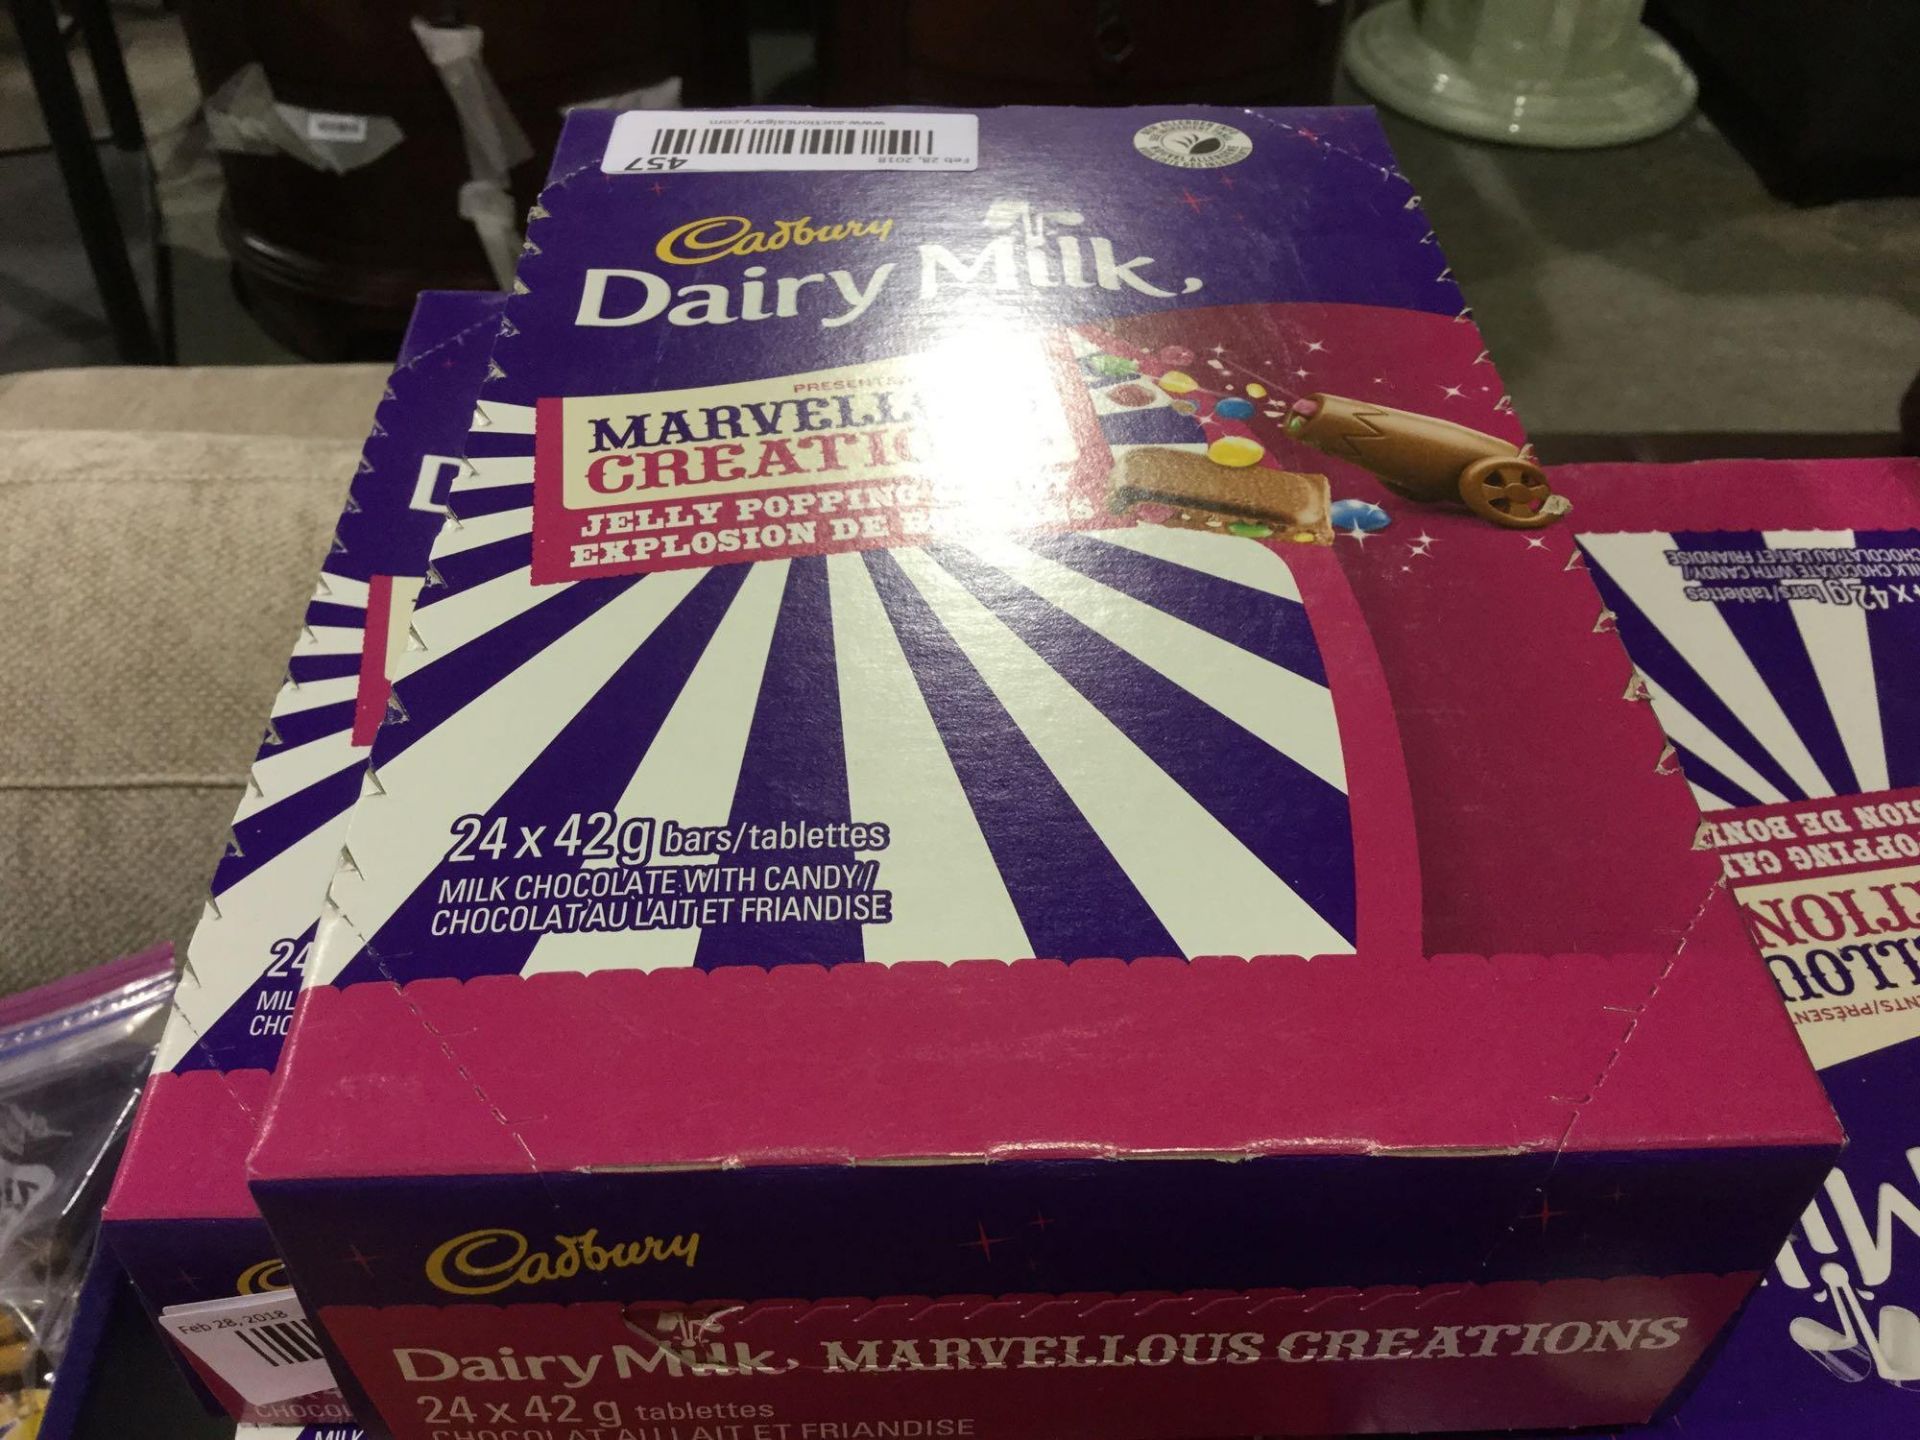 Case of 24 x 42 g Dairy Milk Marvelous Creation Bars - Jelly popping Candy